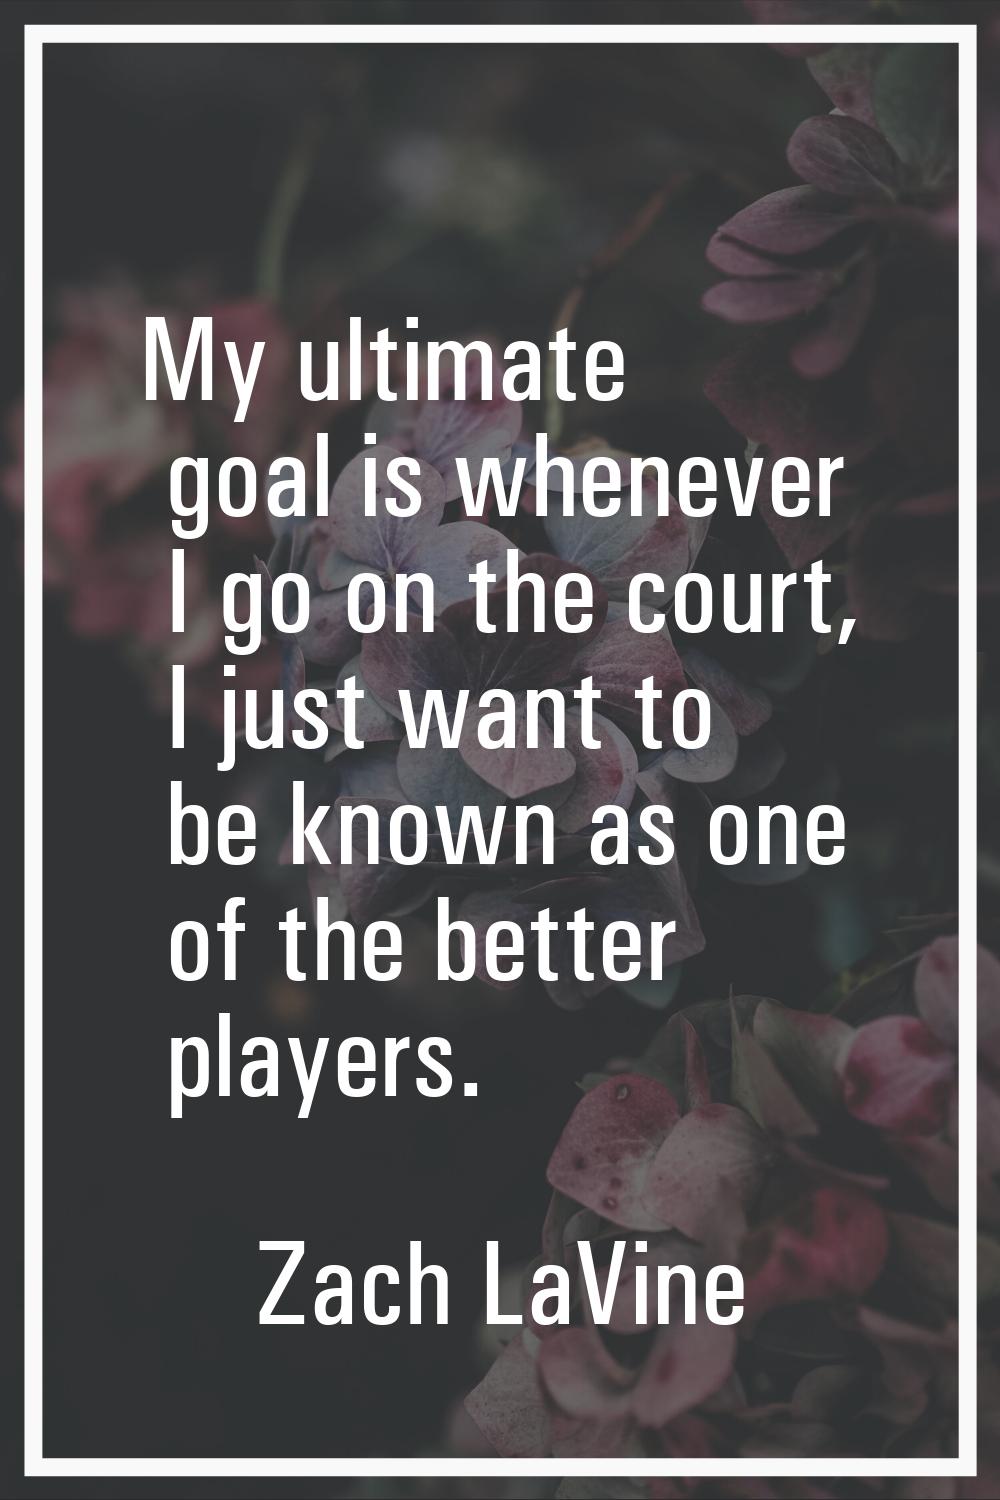 My ultimate goal is whenever I go on the court, I just want to be known as one of the better player